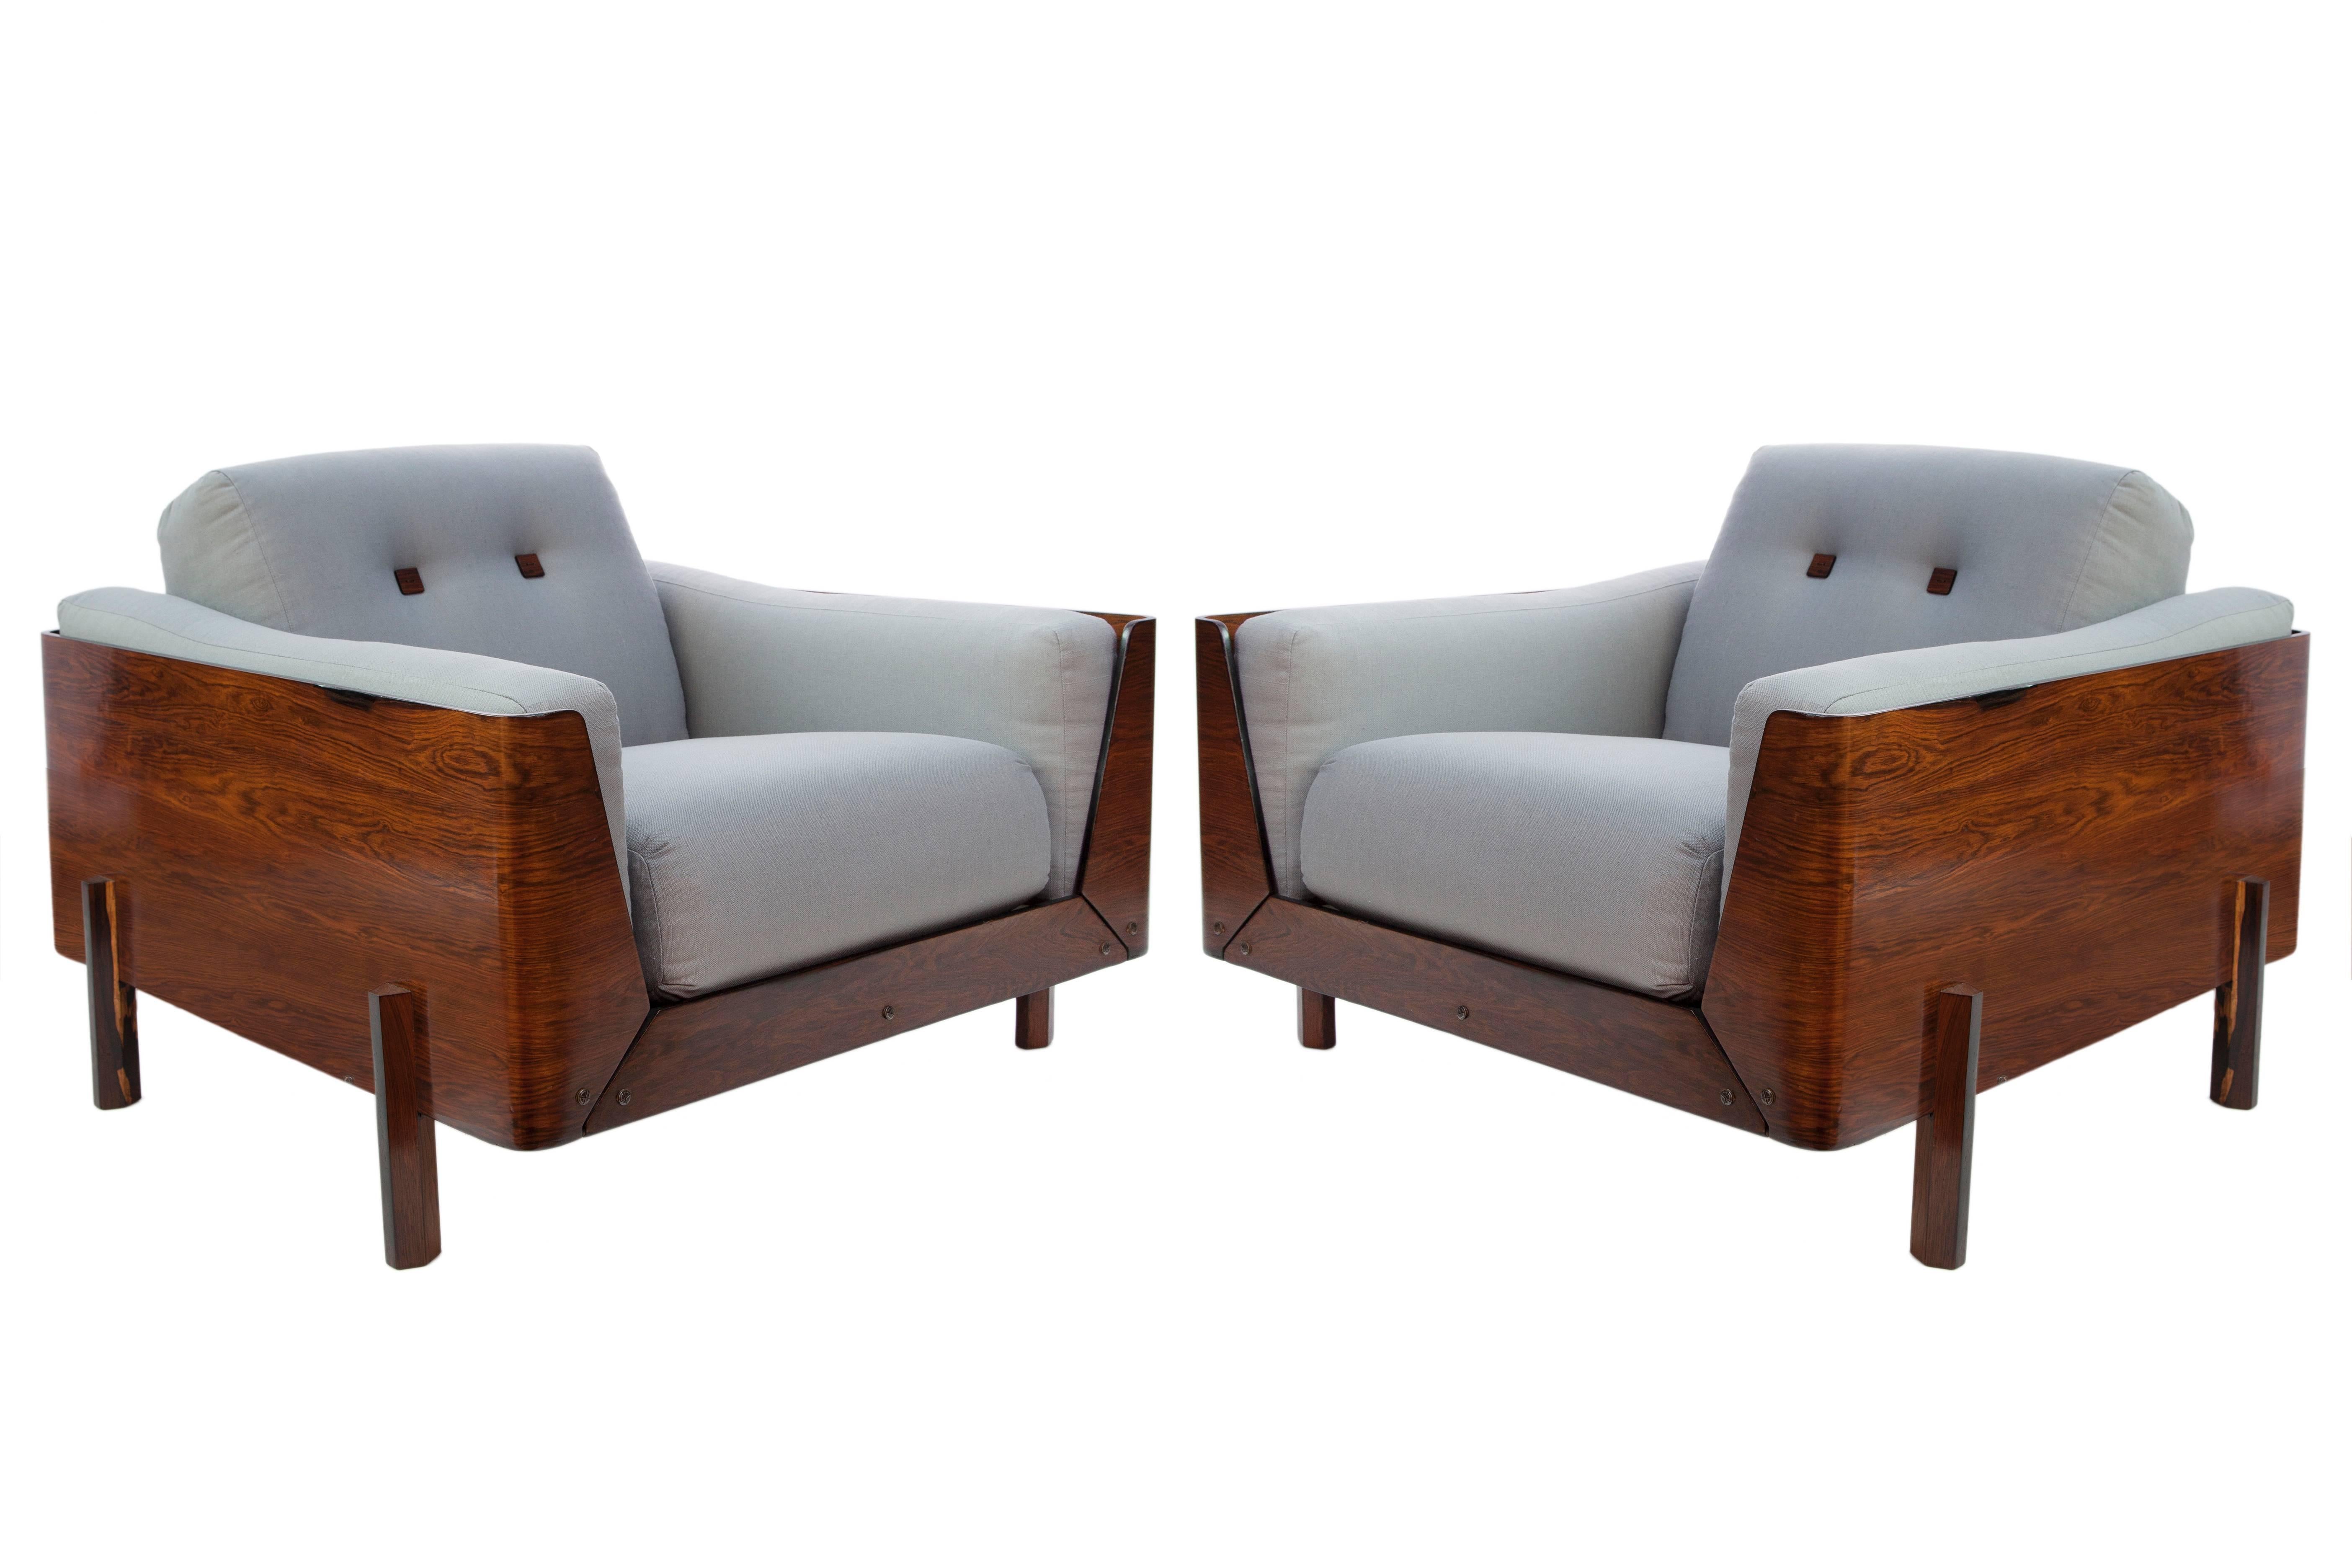 A vintage pair of armchairs, produced in Brazil, circa 1960s, attributed to designer Jorge Zalszupin, with plush cushioned seats, arms and backs, upholstered in grey linen and tufted with square wood buttons, inset within a wonderfully modernistic